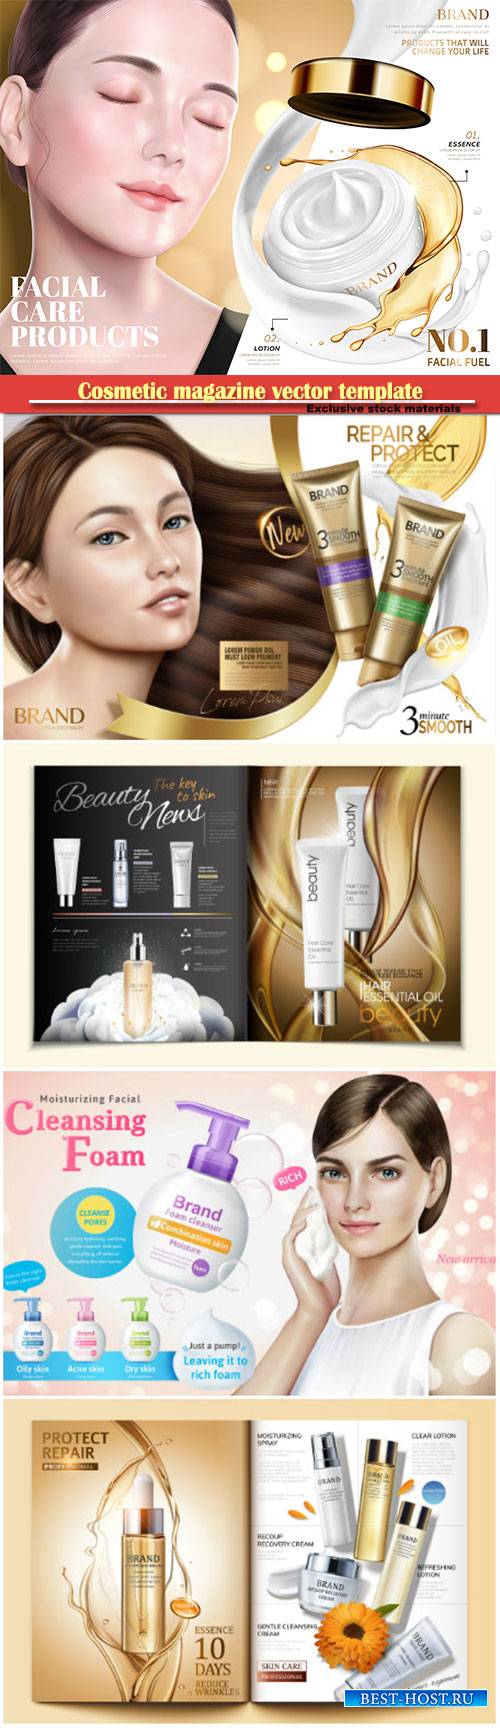 Cosmetic magazine vector template, attractive model with product containers in 3d illustration # 7